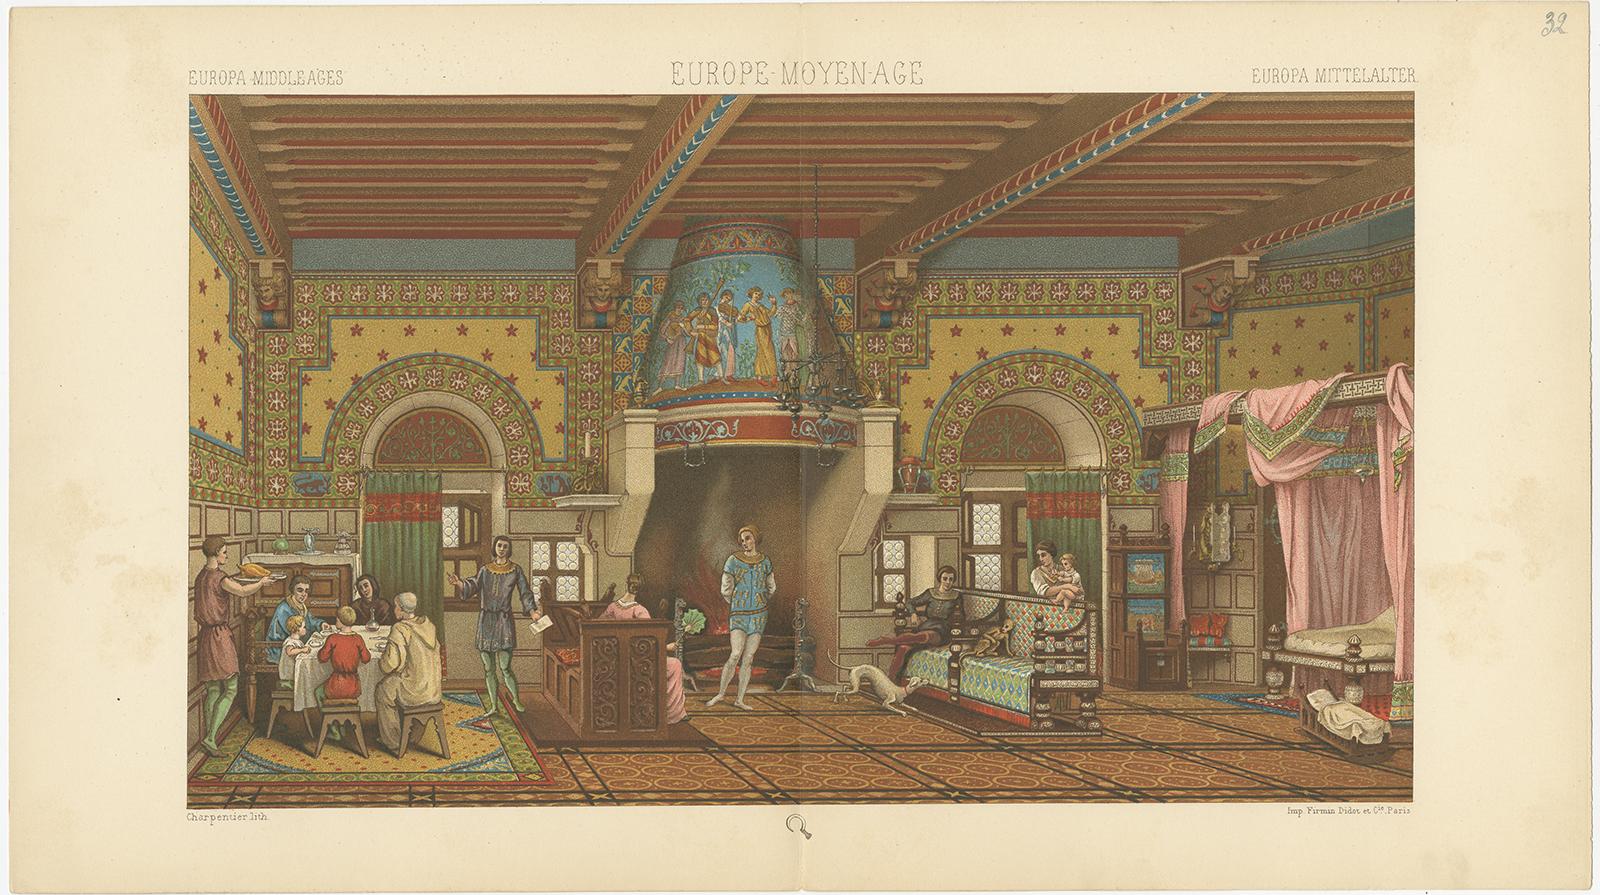 Antique print titled 'Europa Middle Ages - Europe Moyen Age - Europa Mittelalter'. Chromolithograph of European Middle Ages Living Room. This print originates from 'Le Costume Historique' by M.A. Racinet. Published circa 1880.